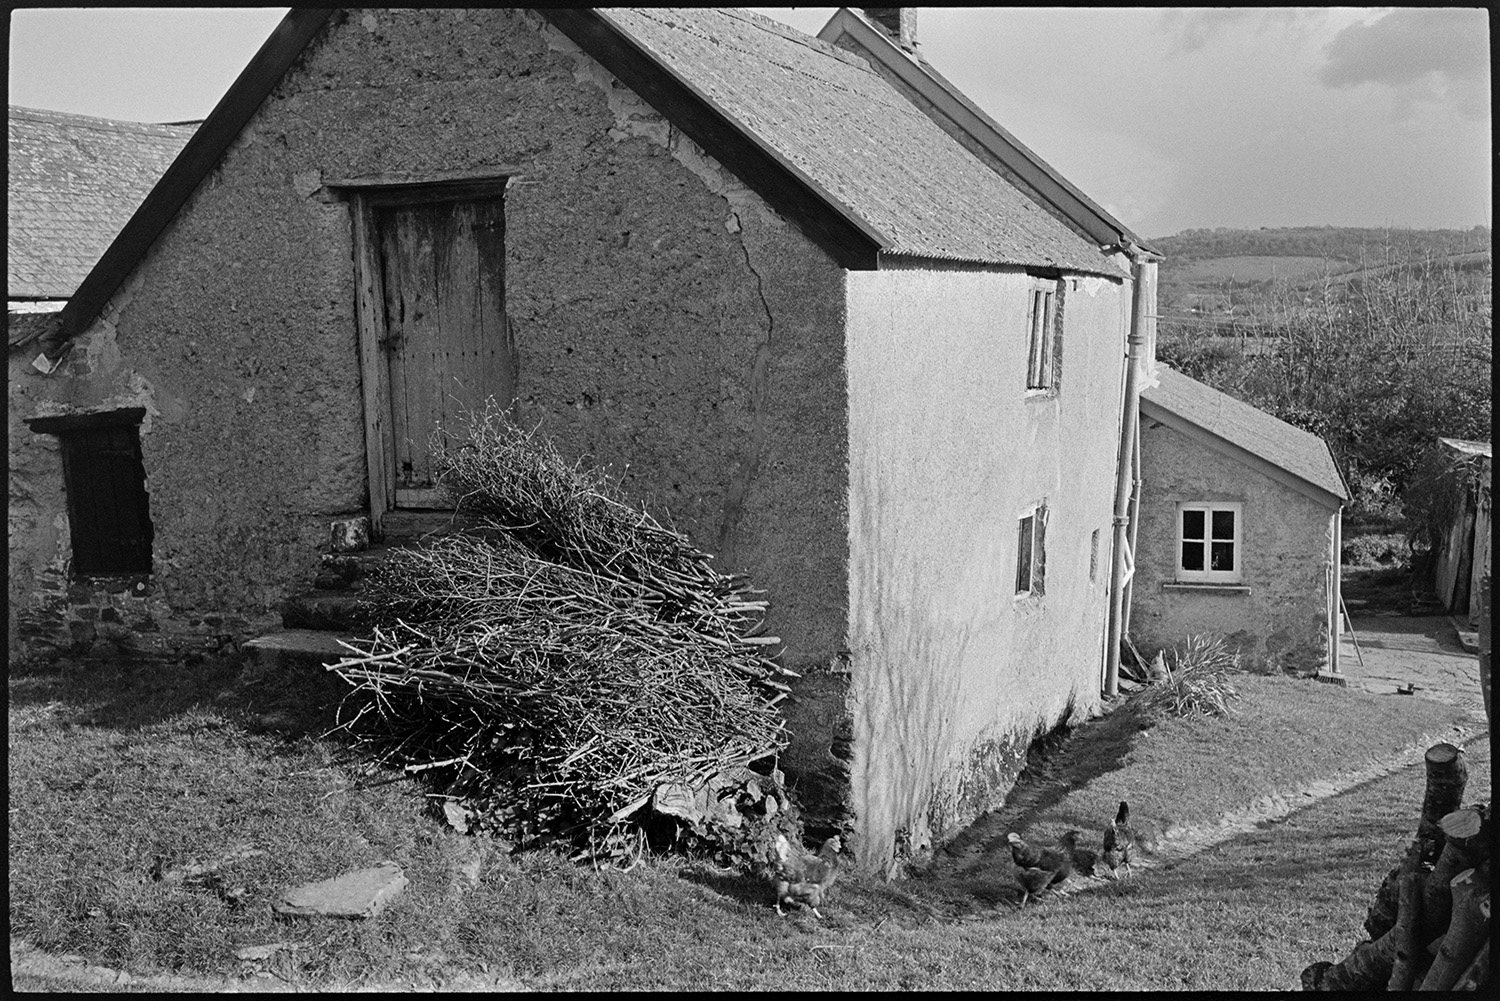 Pile of kindling or pea sticks beside barn.
[Twigs for use as kindling or pea sticks piled against the wall of a cob farm building at Harford, Landkey. Three chickens are walking down a path to the farmhouse in the foreground.]